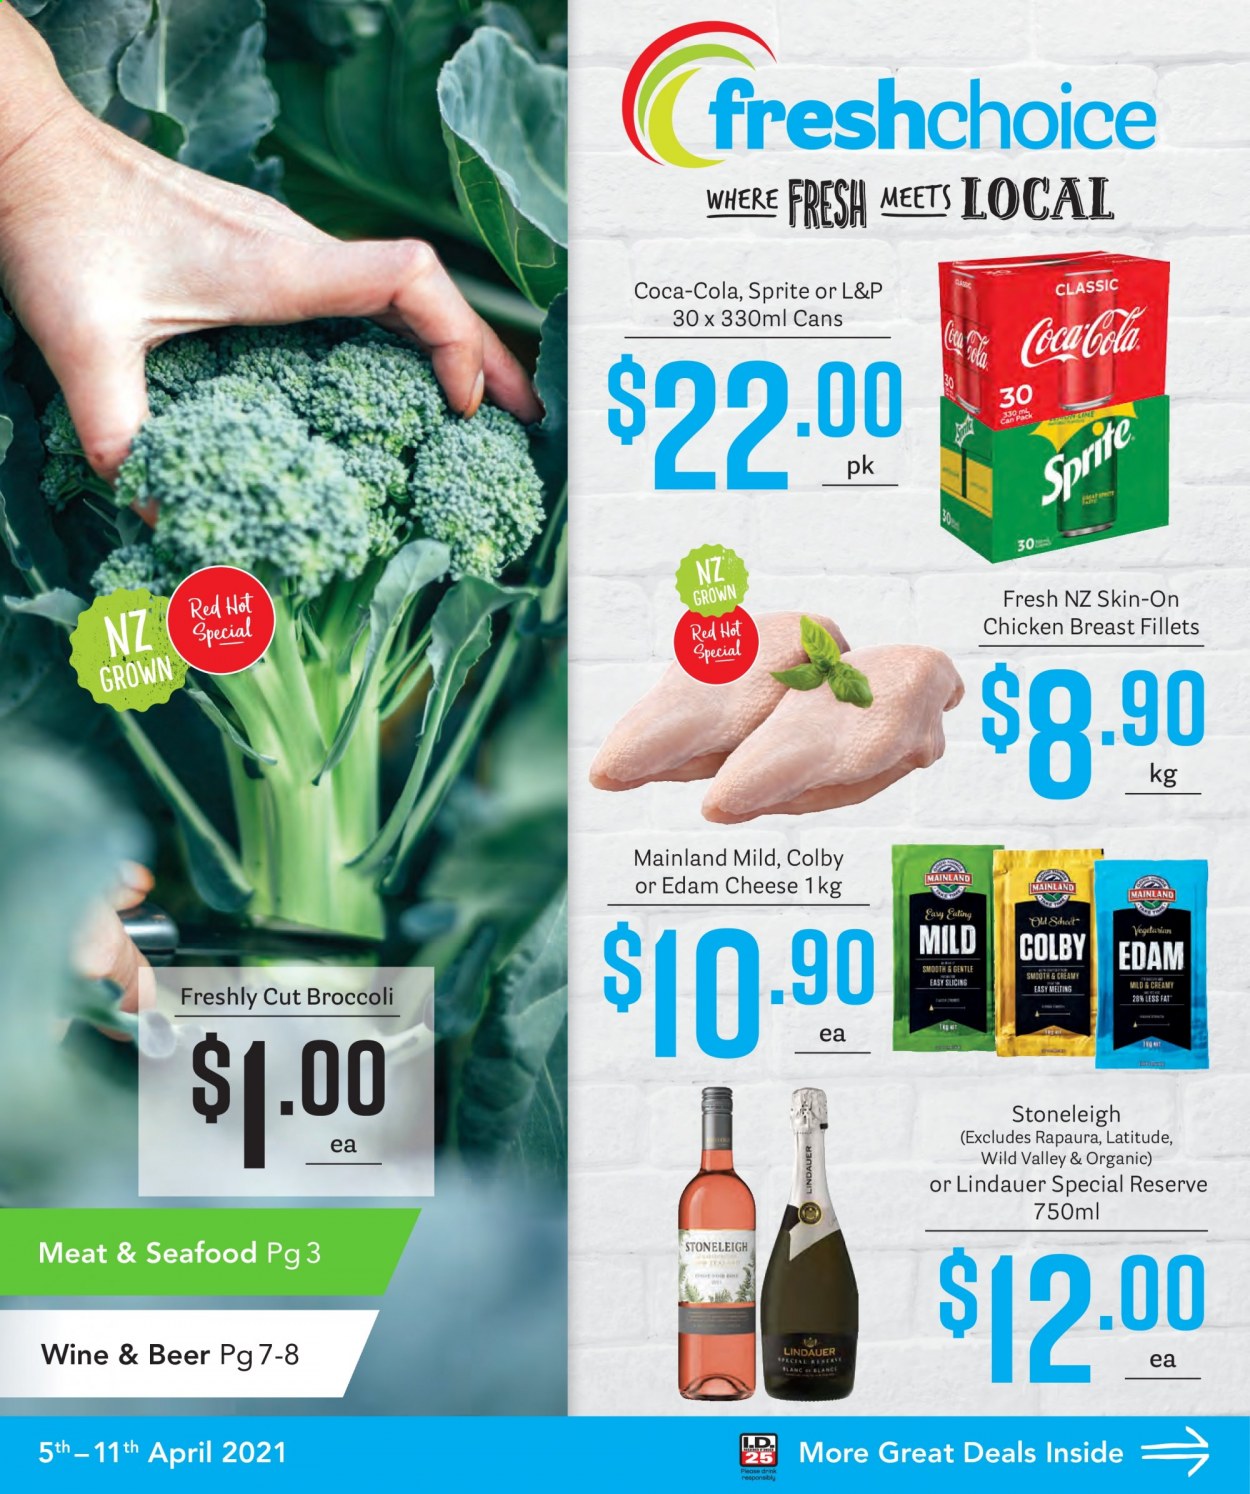 thumbnail - Fresh Choice mailer - 05.04.2021 - 11.04.2021 - Sales products - broccoli, seafood, Colby cheese, edam cheese, cheese, Coca-Cola, Sprite, L&P, sparkling wine, wine, Lindauer, beer, chicken breasts. Page 1.